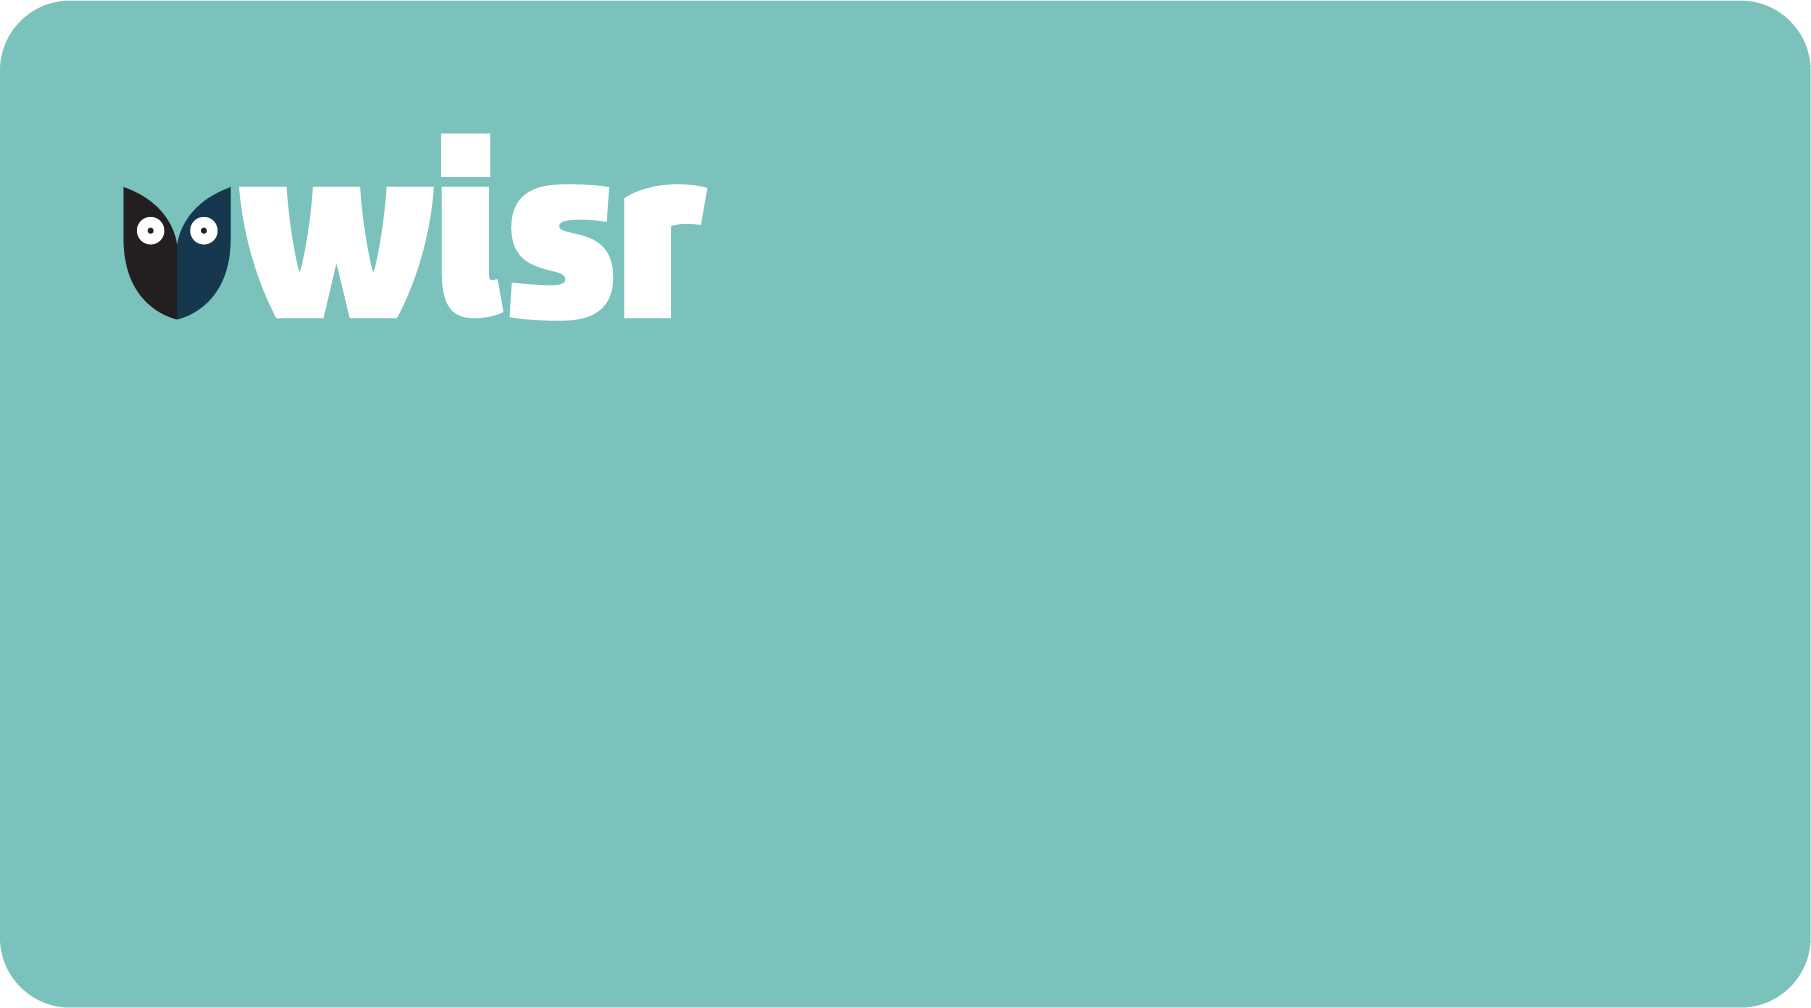 Wisr is an ASX-listed fintech and neo-lender